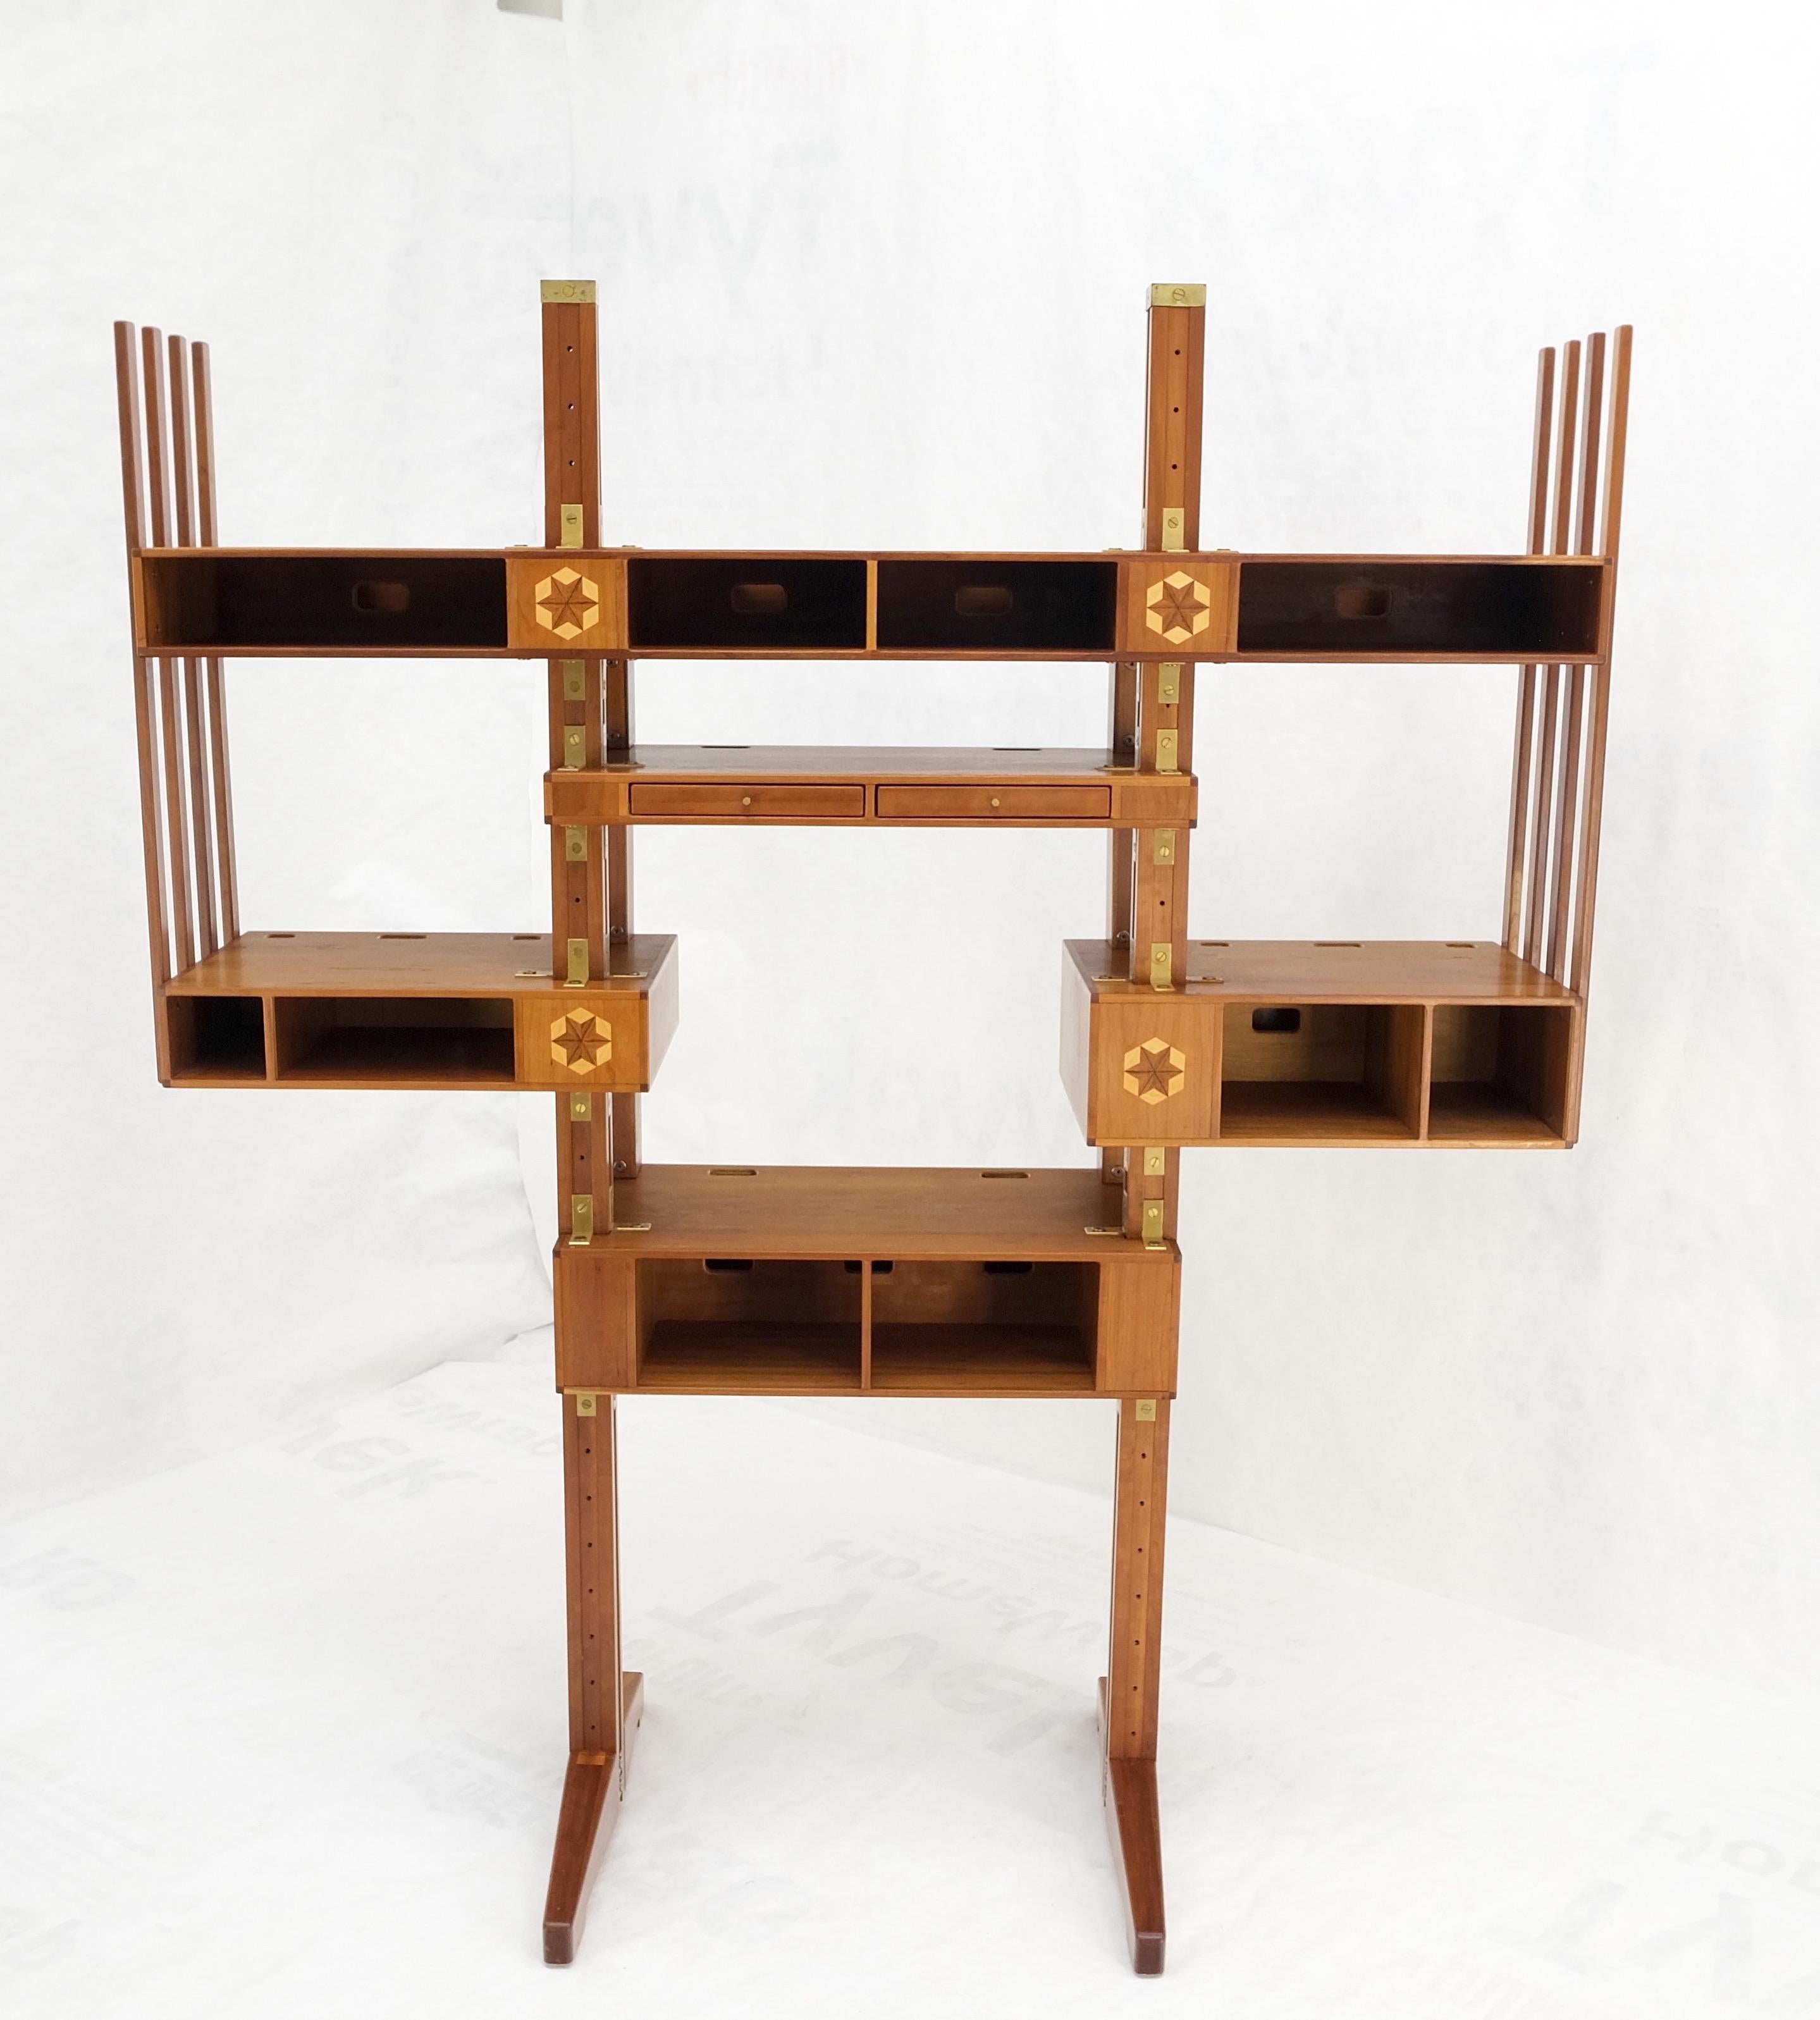 Custom stereo equipment etagere shelf with sophisticated concealed chaise way mint.